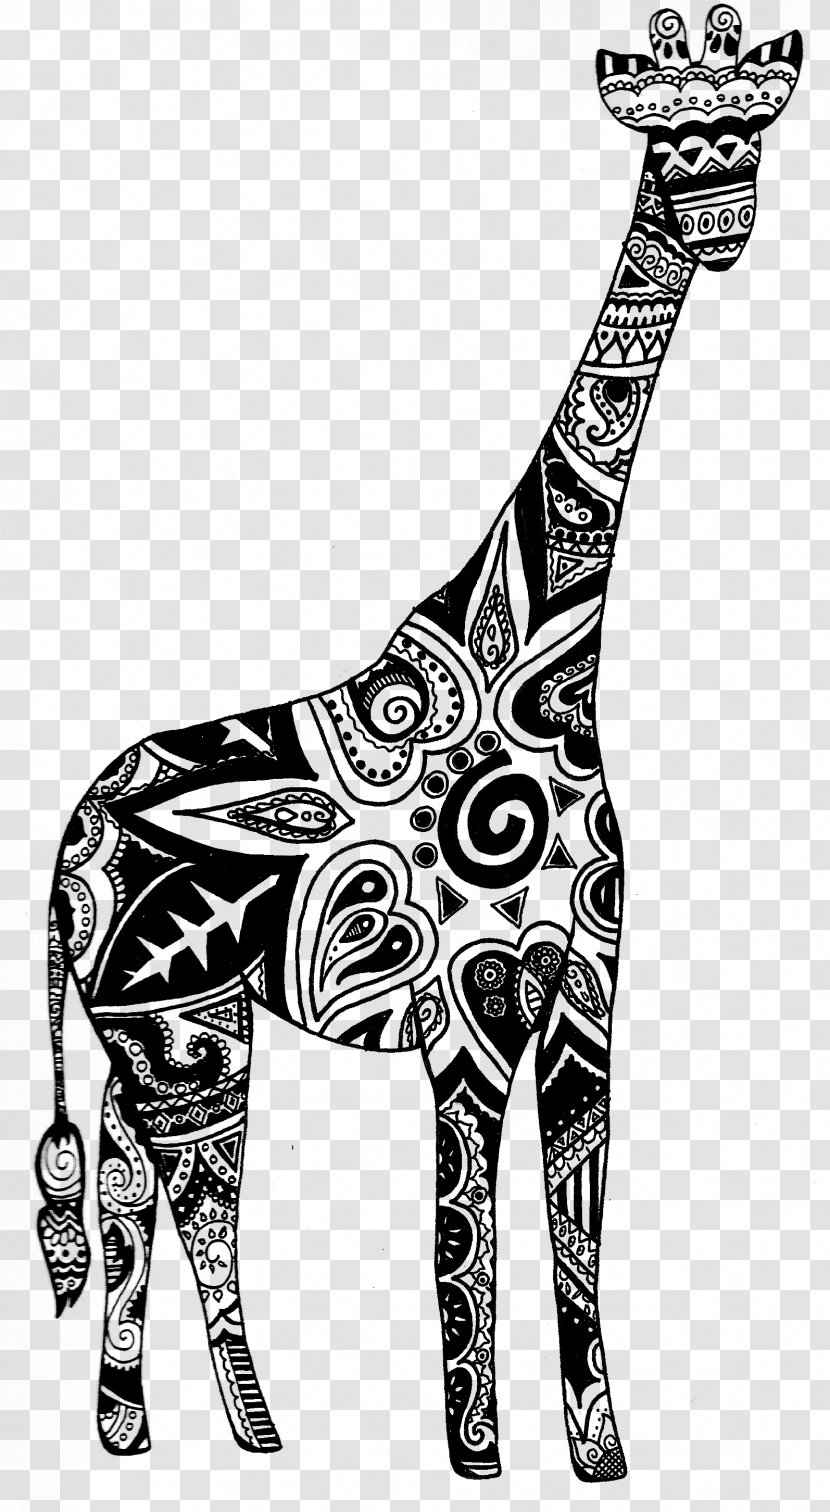 Giraffe Henna Drawing Poster Clip Art - Black And White - Outline Cliparts Transparent PNG